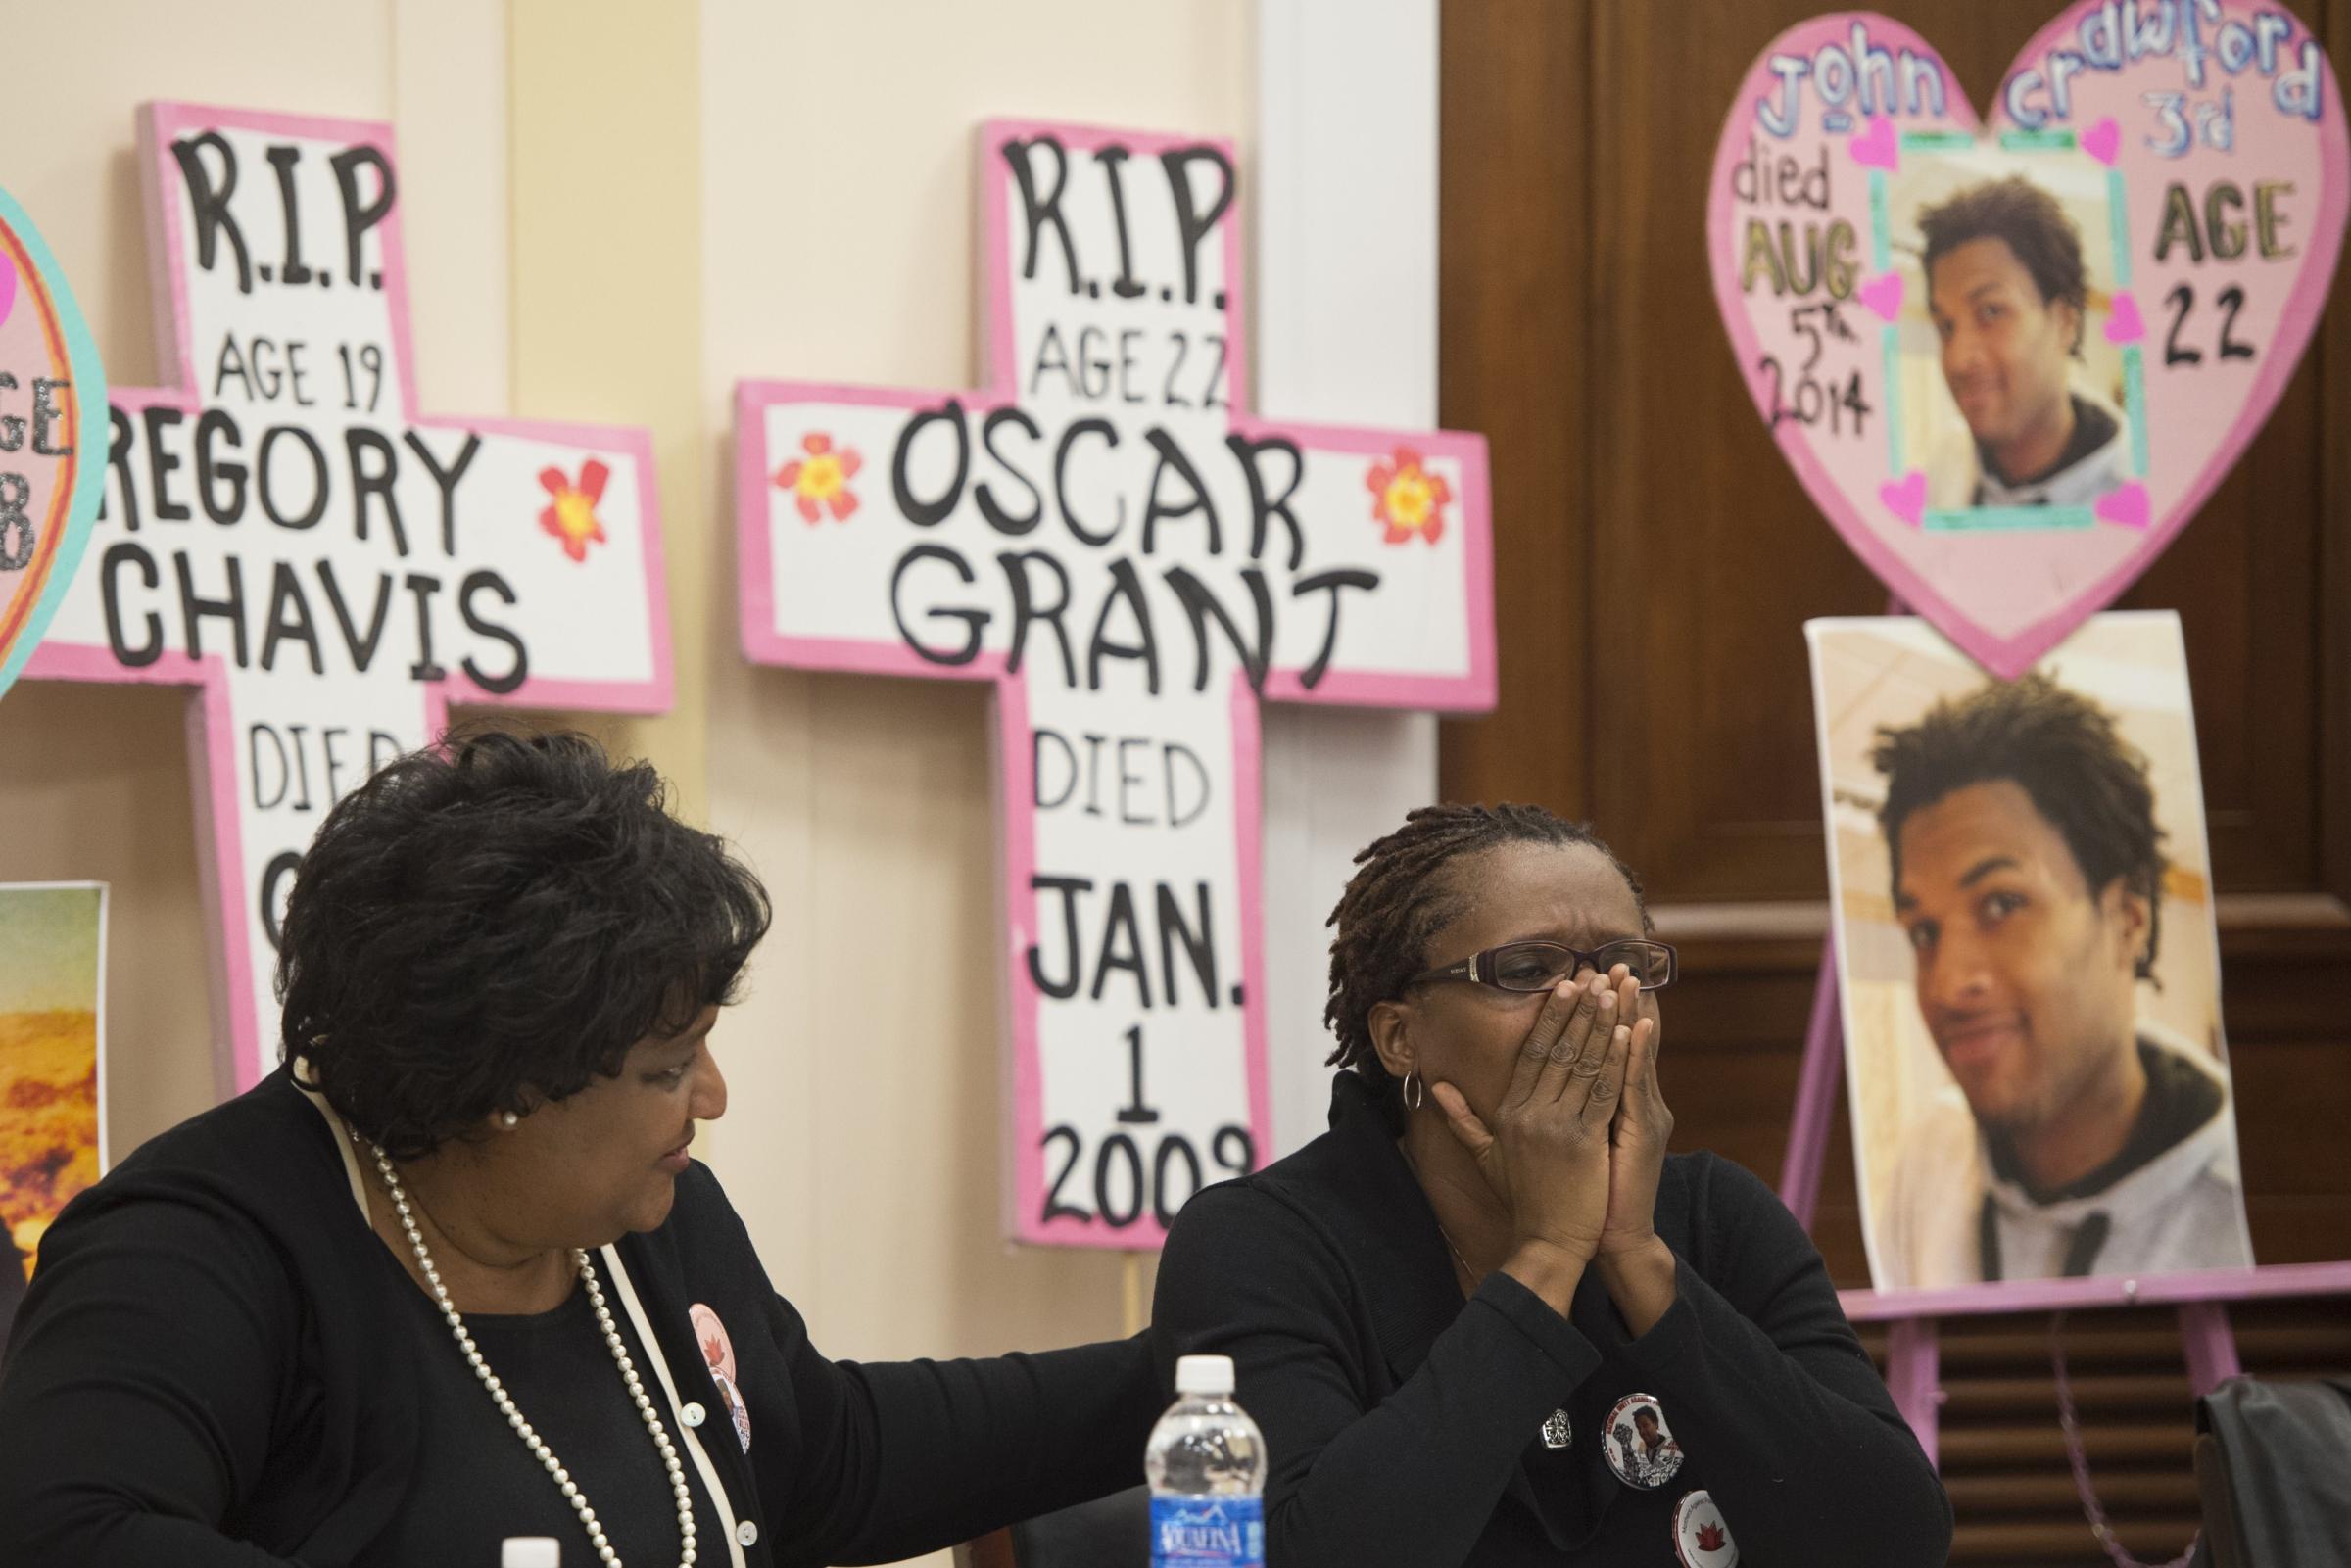 Mothers who have lost sons due to police action, including Tressa Sherrod (R), mother of 22-year-old John Crawford III, attend a press conference calling for police accountability and reform on Capitol Hill in Washington on Dec. 10, 2014.